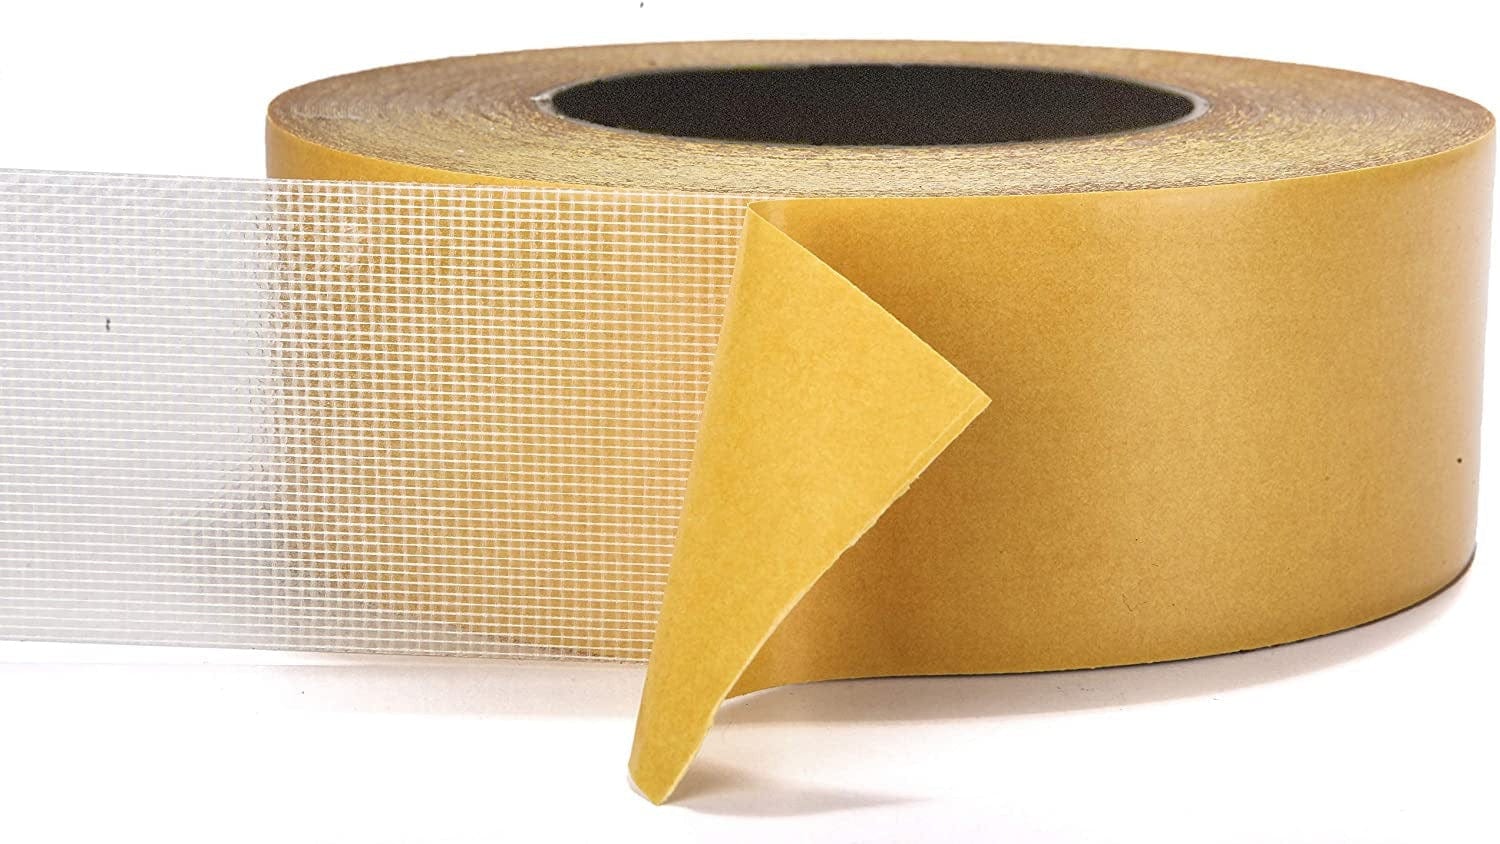 Double Sided Carpet Tape – Crazy Productz